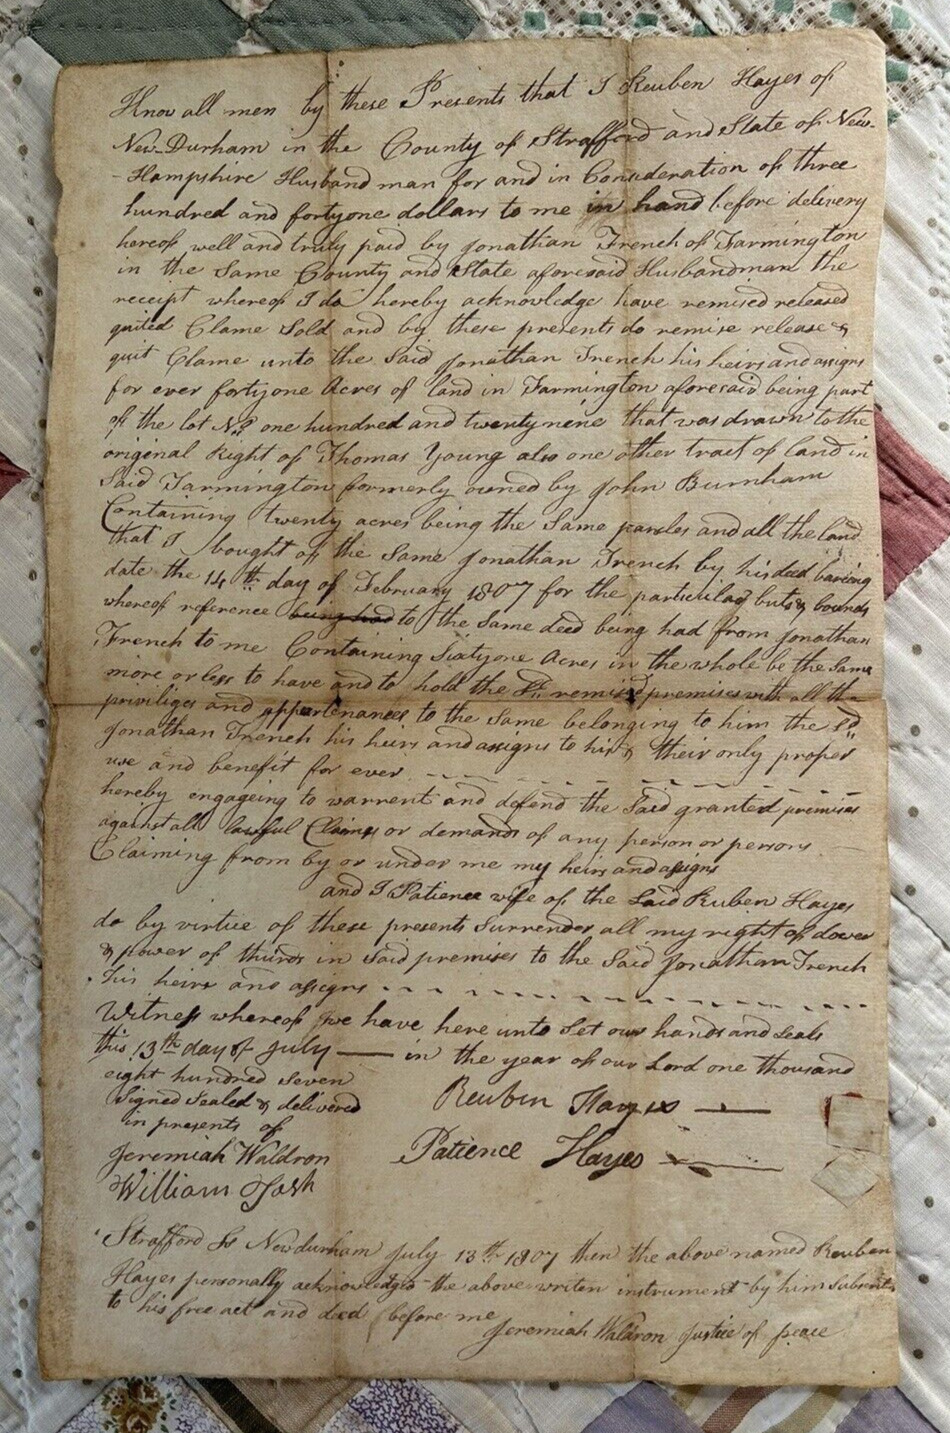 1807 * HAYES to FRENCH * LAND IN FARMINGTON, NEW HAMPSHIRE * 122 ACRES